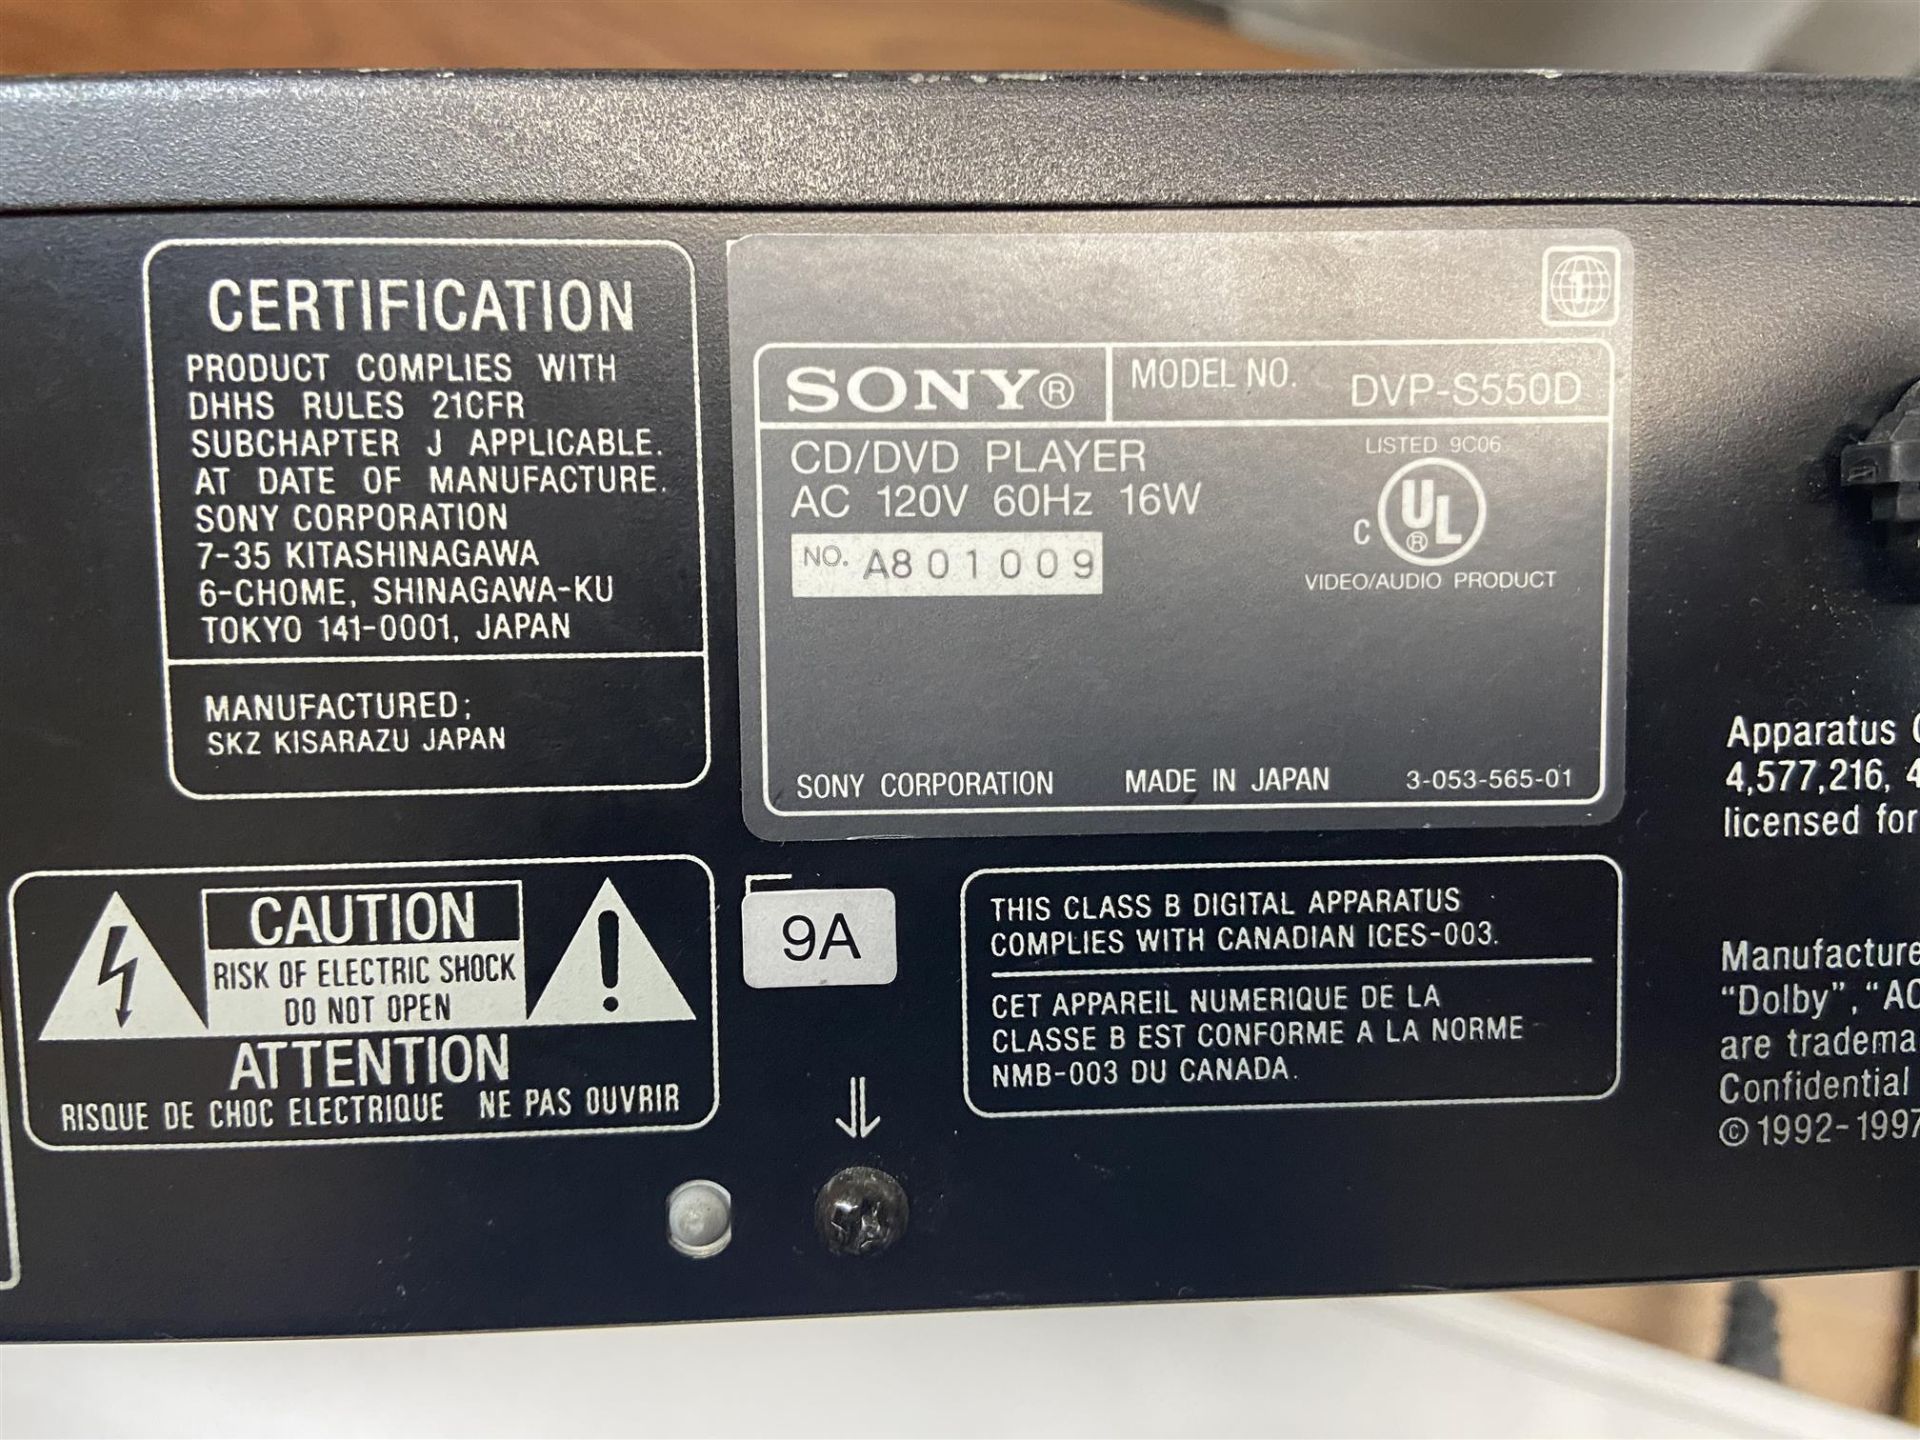 Lot of DVD Players, Toshiba SD-3990SC & SONY DVP-S550D - Image 3 of 3